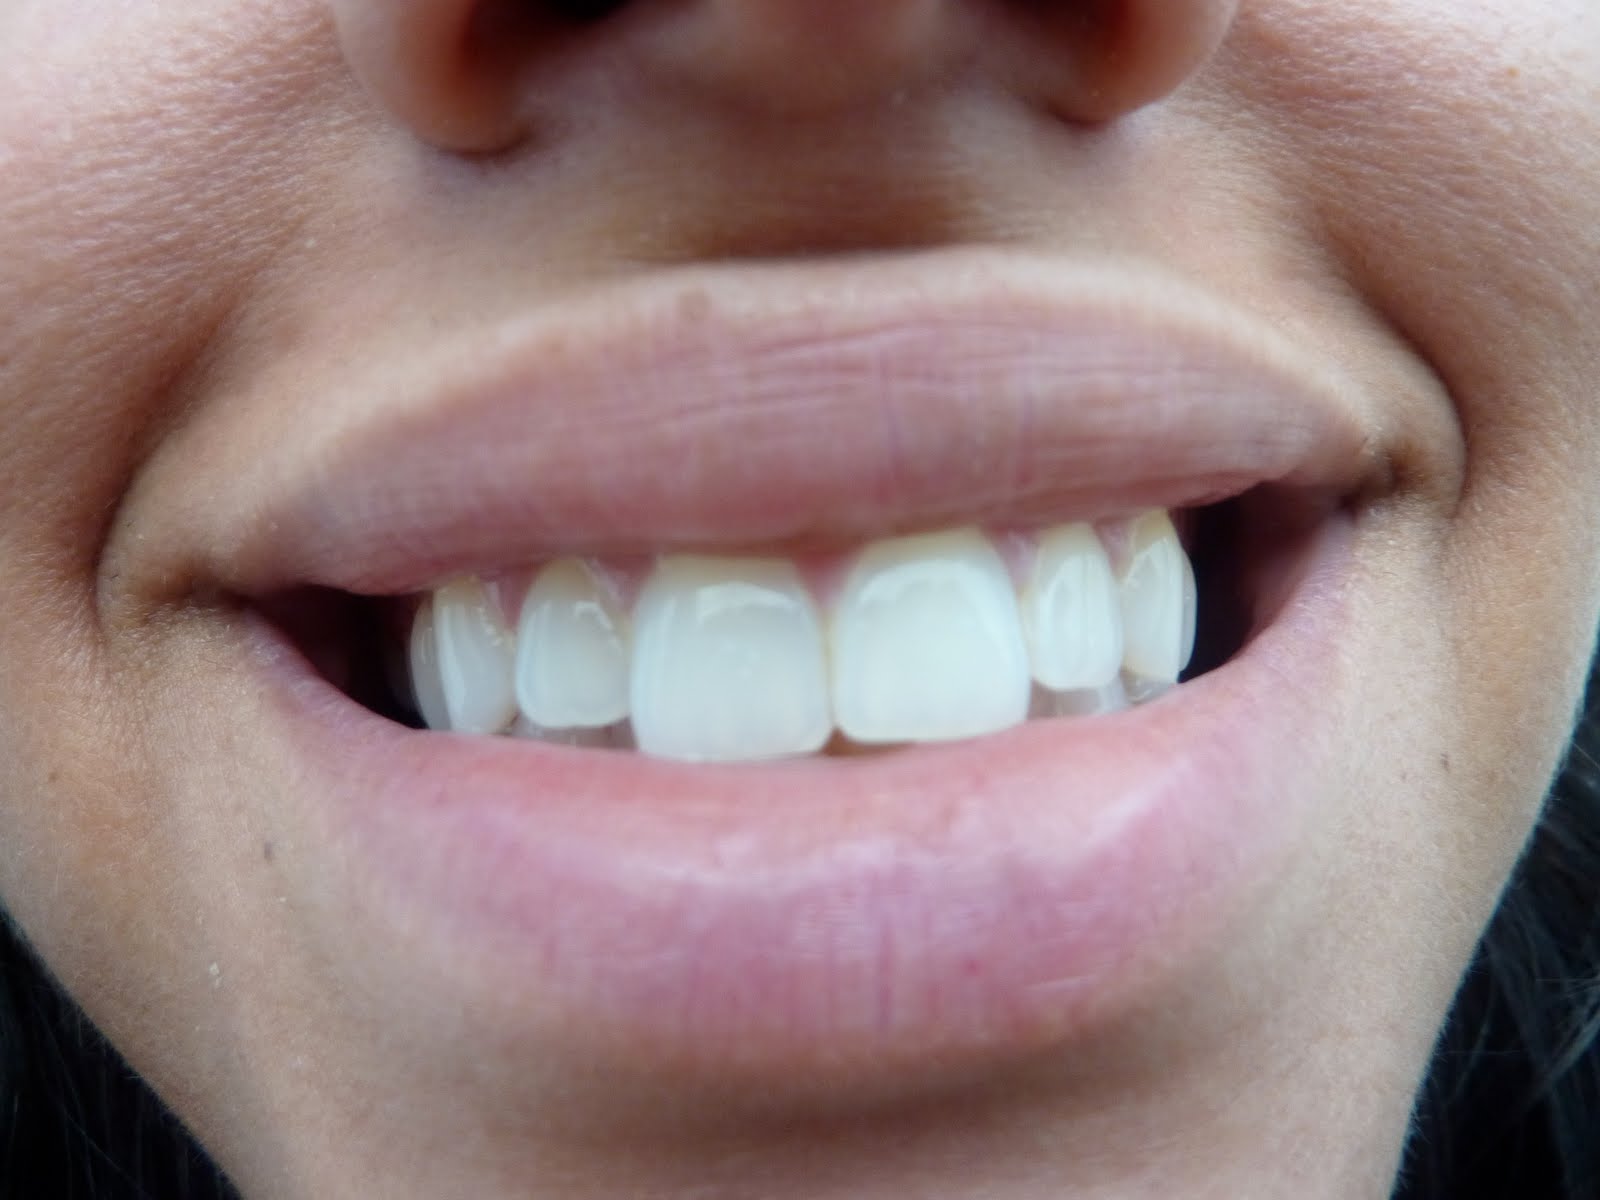 Crest whitestrips before and after photos : Teeth bleaching gel side 